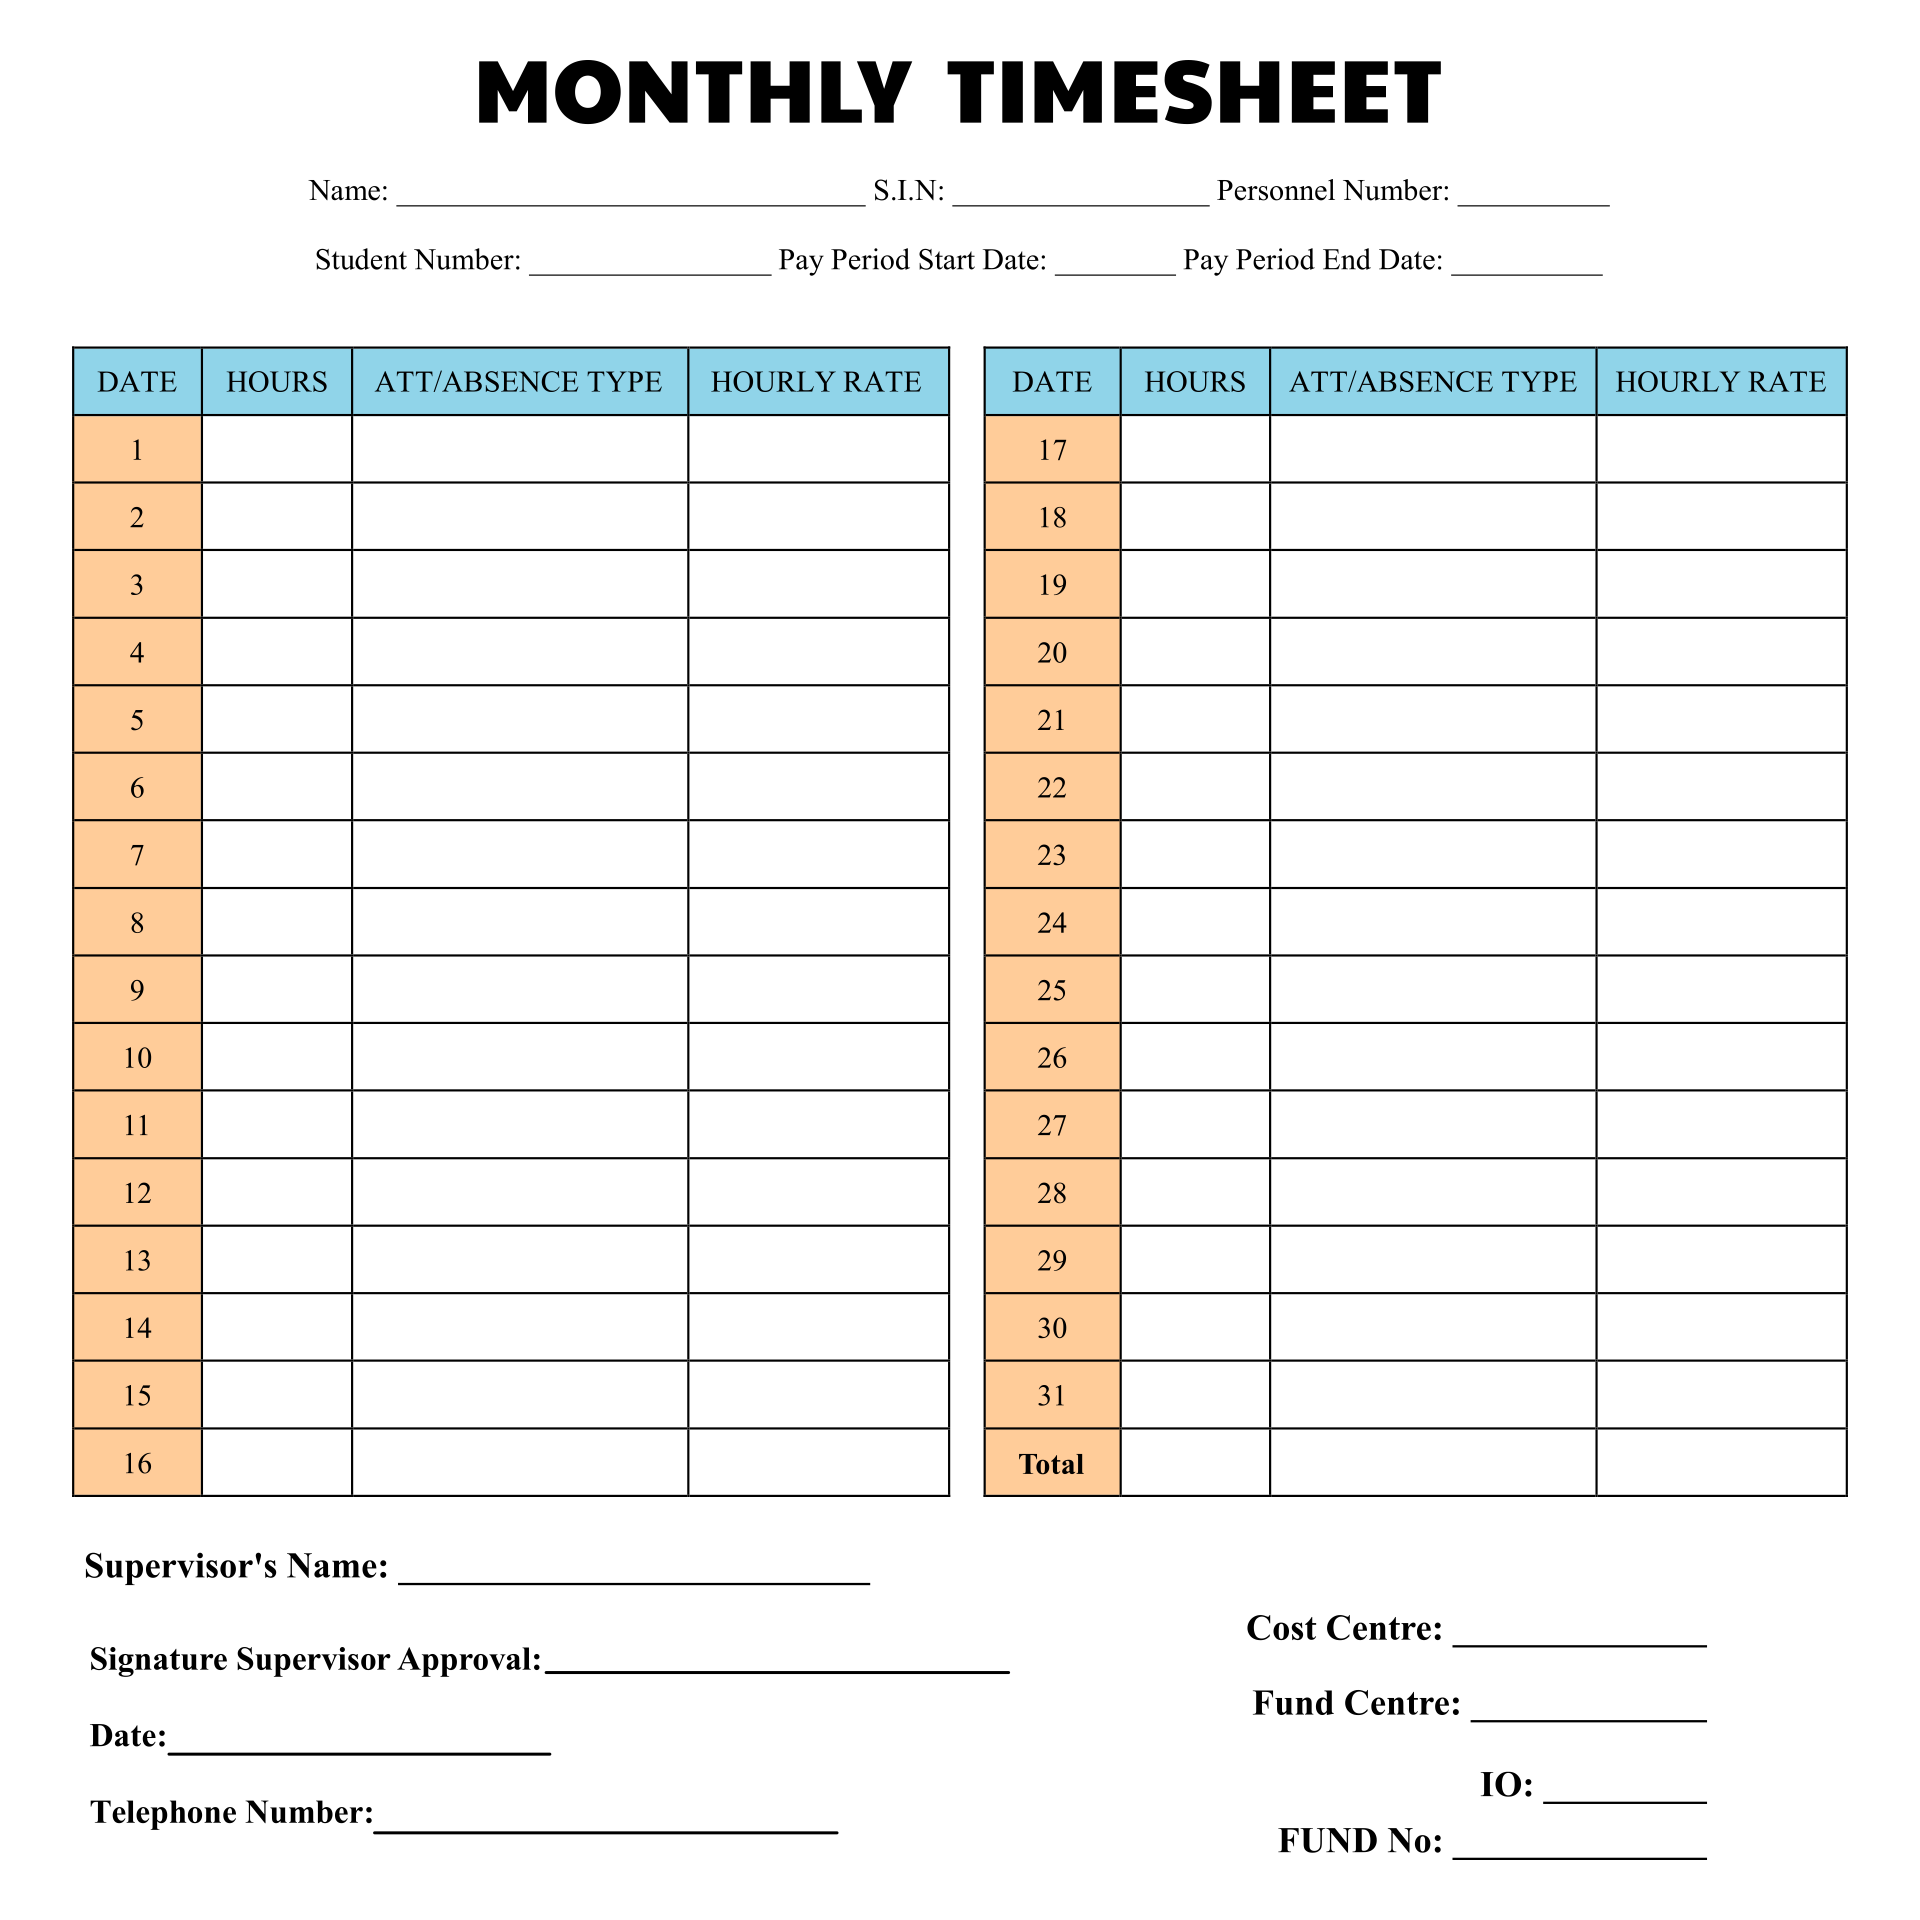 Monthly Time Sheets 10 Free PDF Printables Printablee